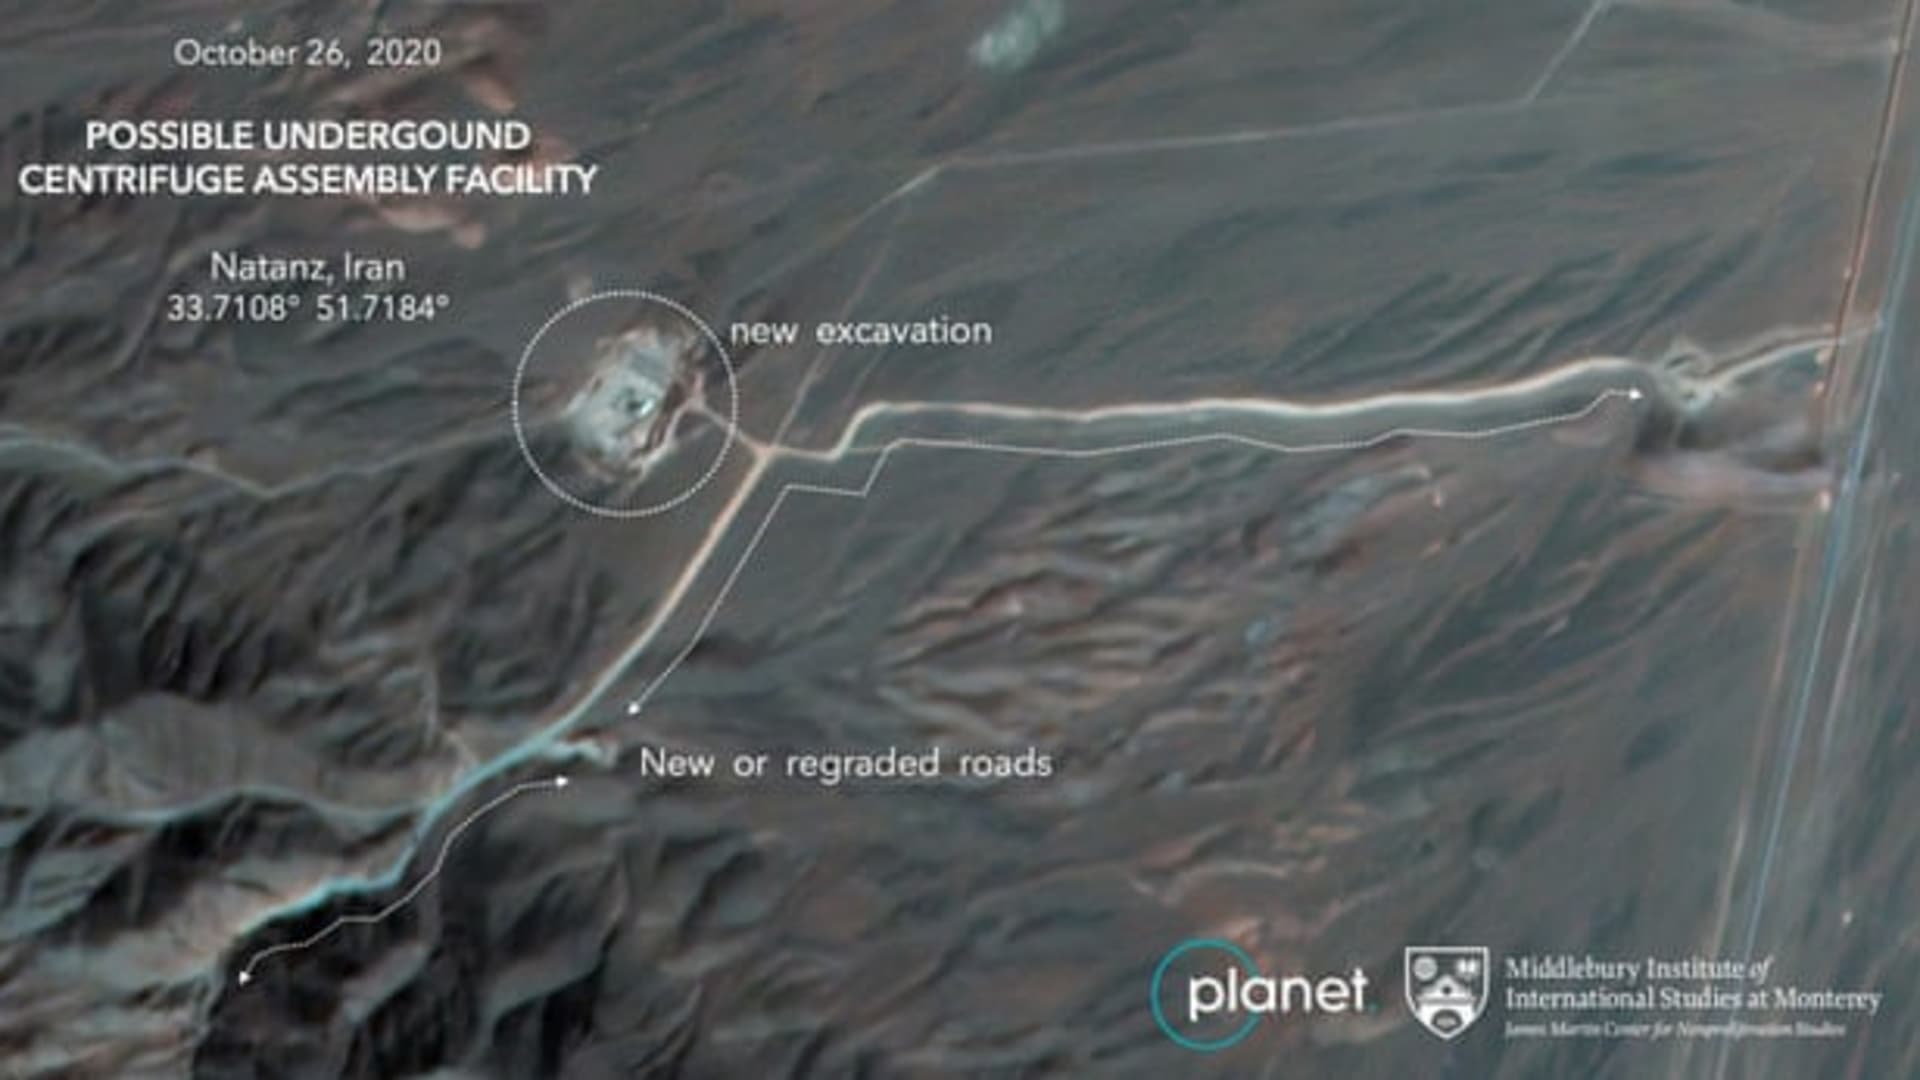 An annotated satellite image of construction at Iran's Natanz uranium enrichment facility, with analysis by the Middlebury Institute of International Studies at Monterey.